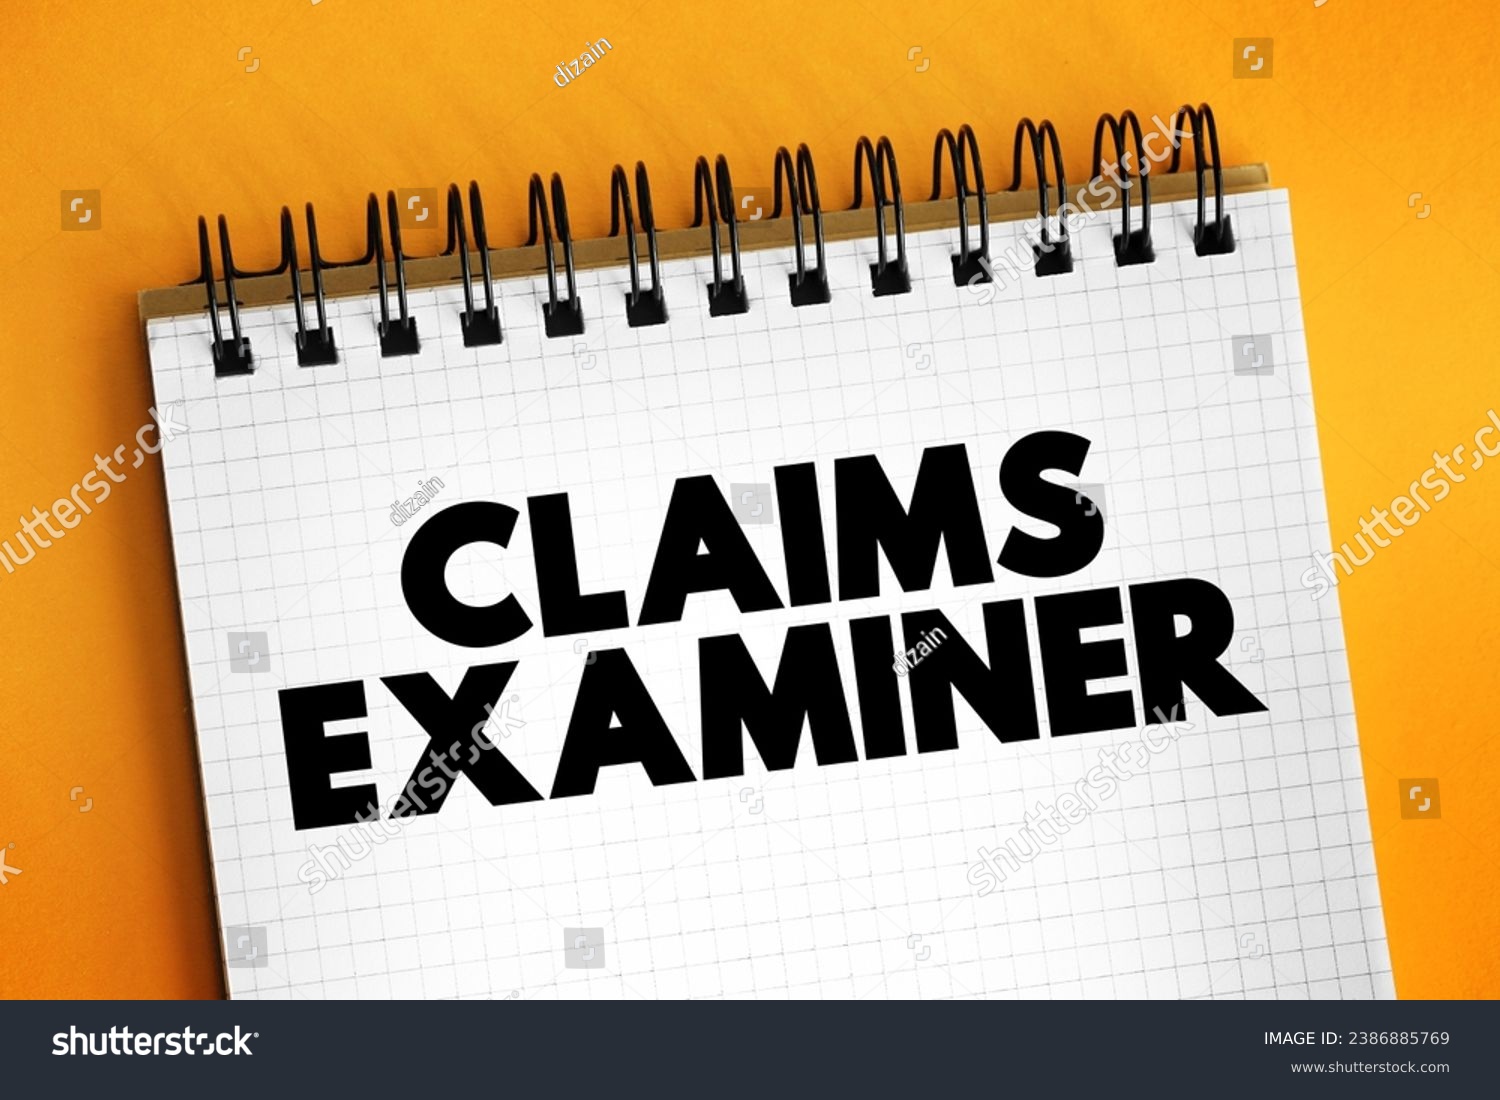 Claims Examiner - review insurance claims to verify both the claimant and claim adjuster followed due process during the investigation, text concept background #2386885769